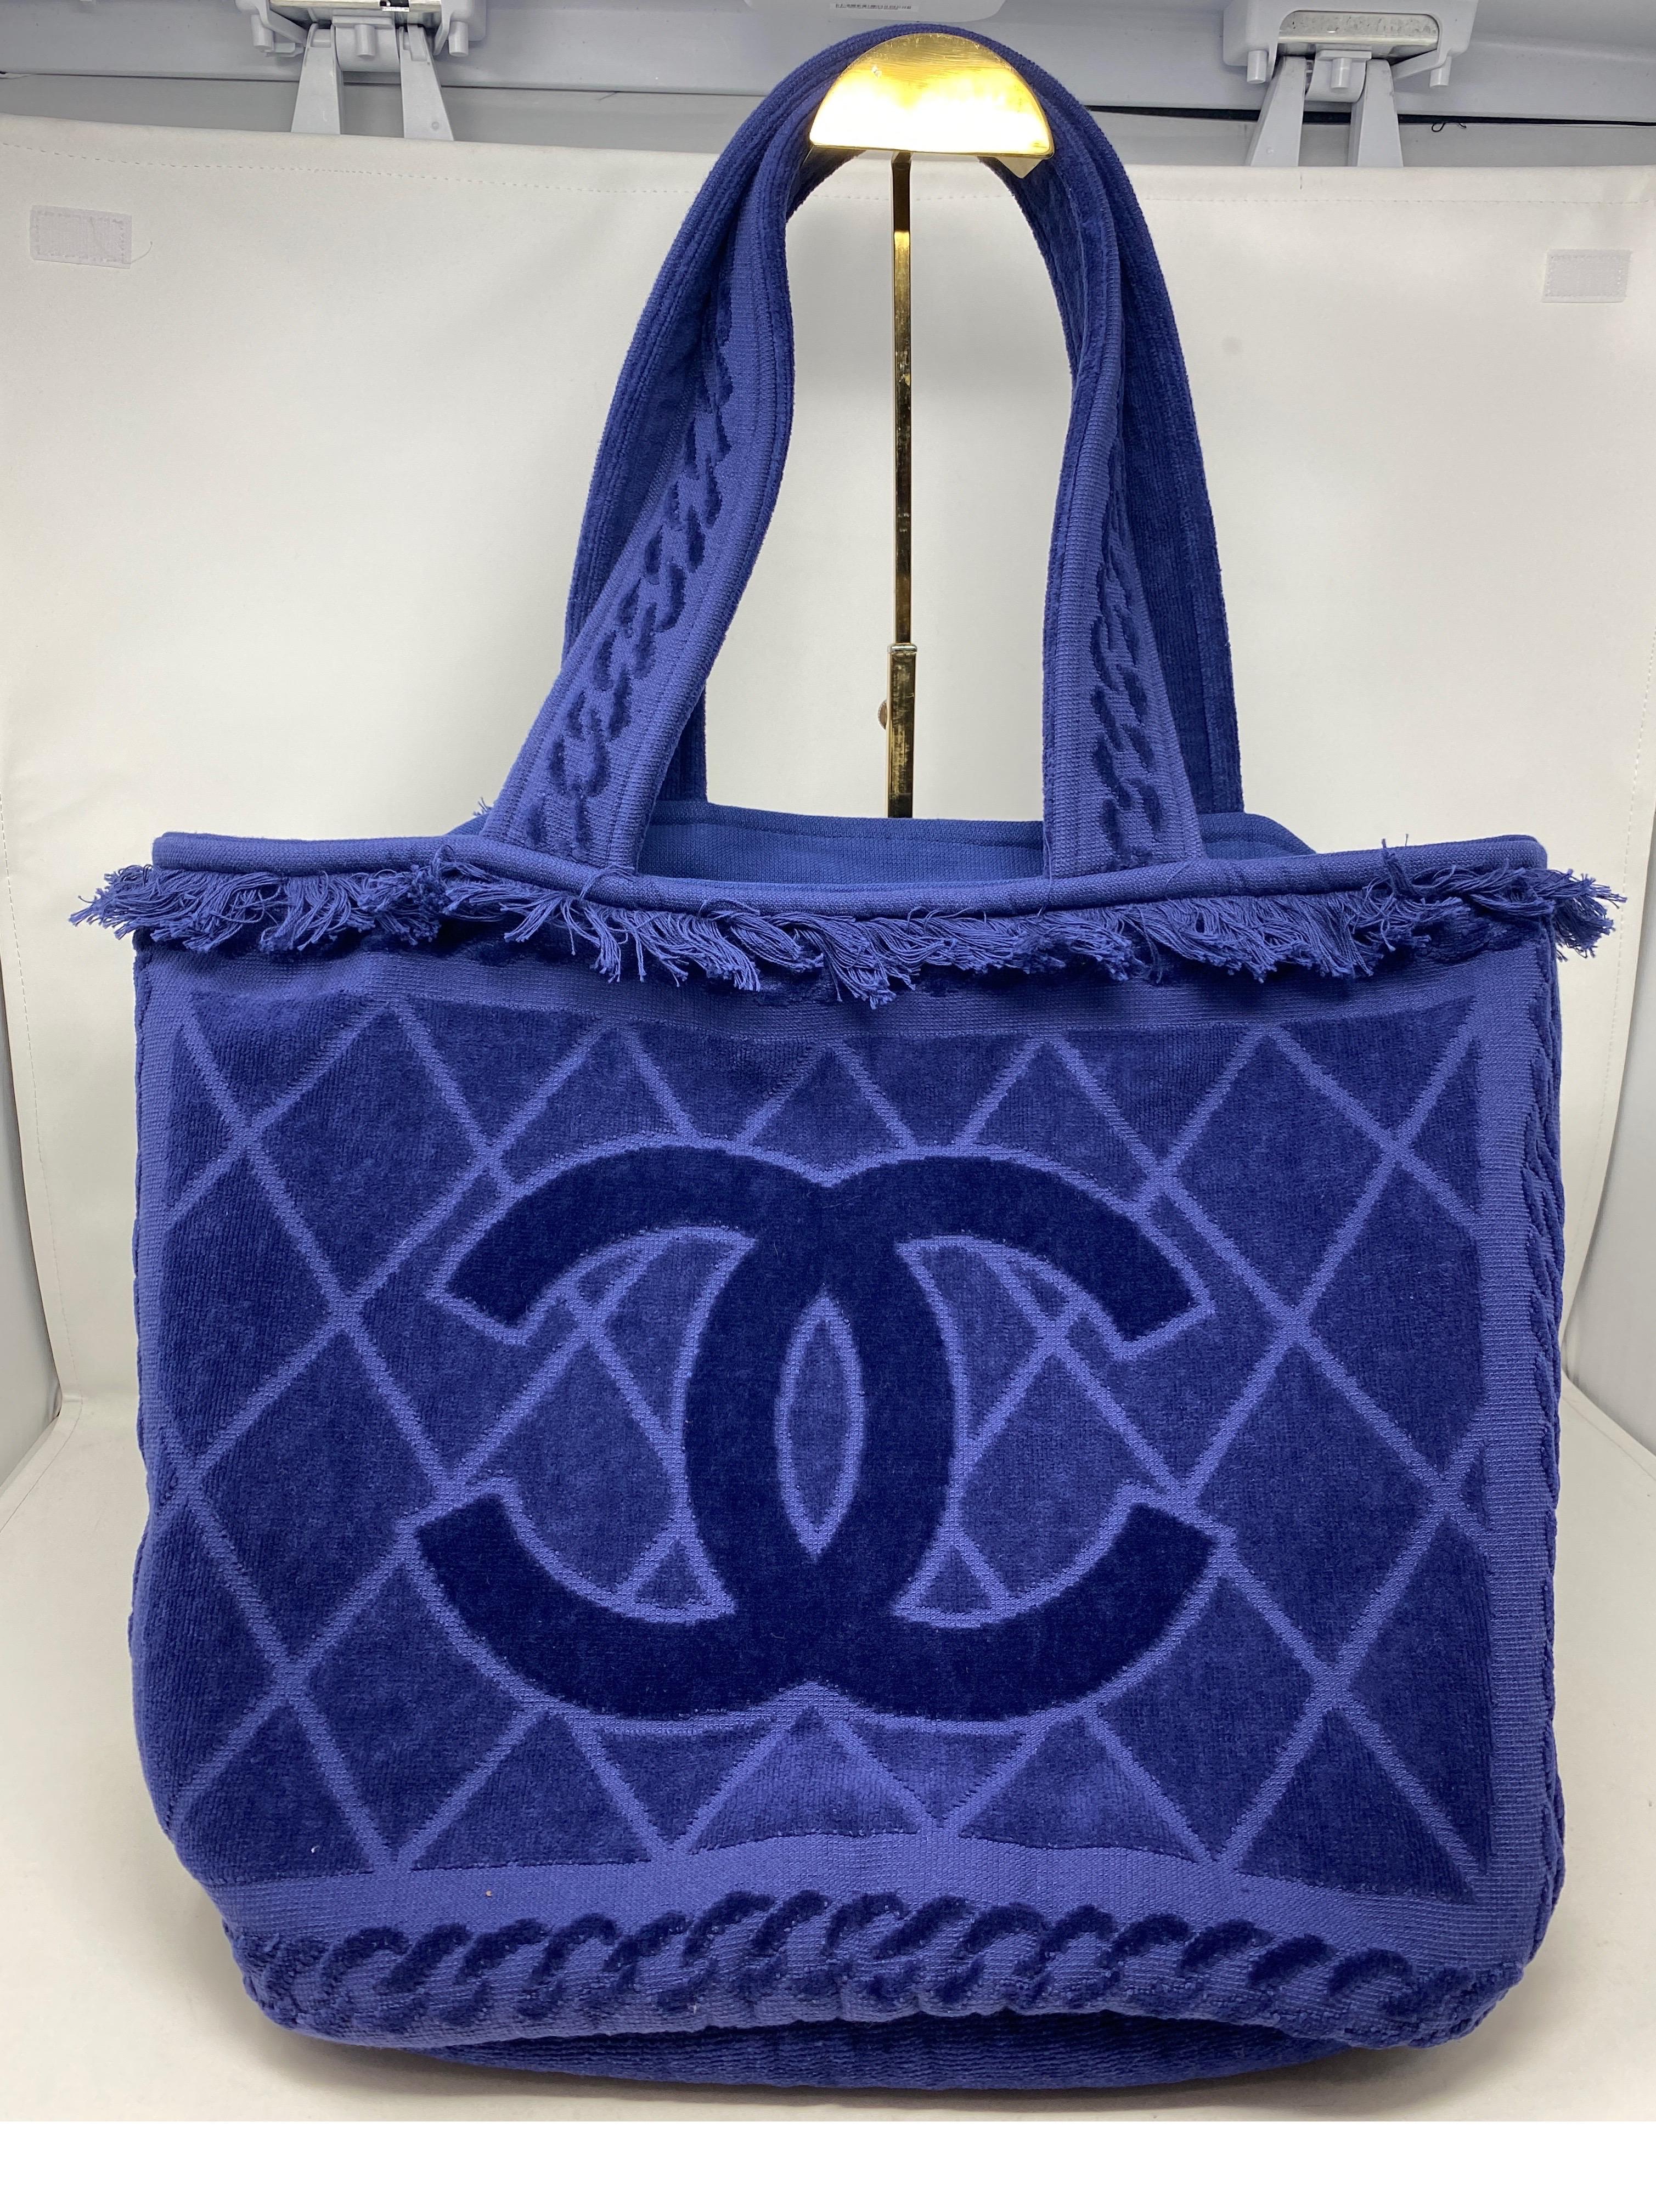 Chanel Blue Towel Tote Bag. Like new condition. Rare towel purse. Never used with original tag. Guaranteed authentic. 